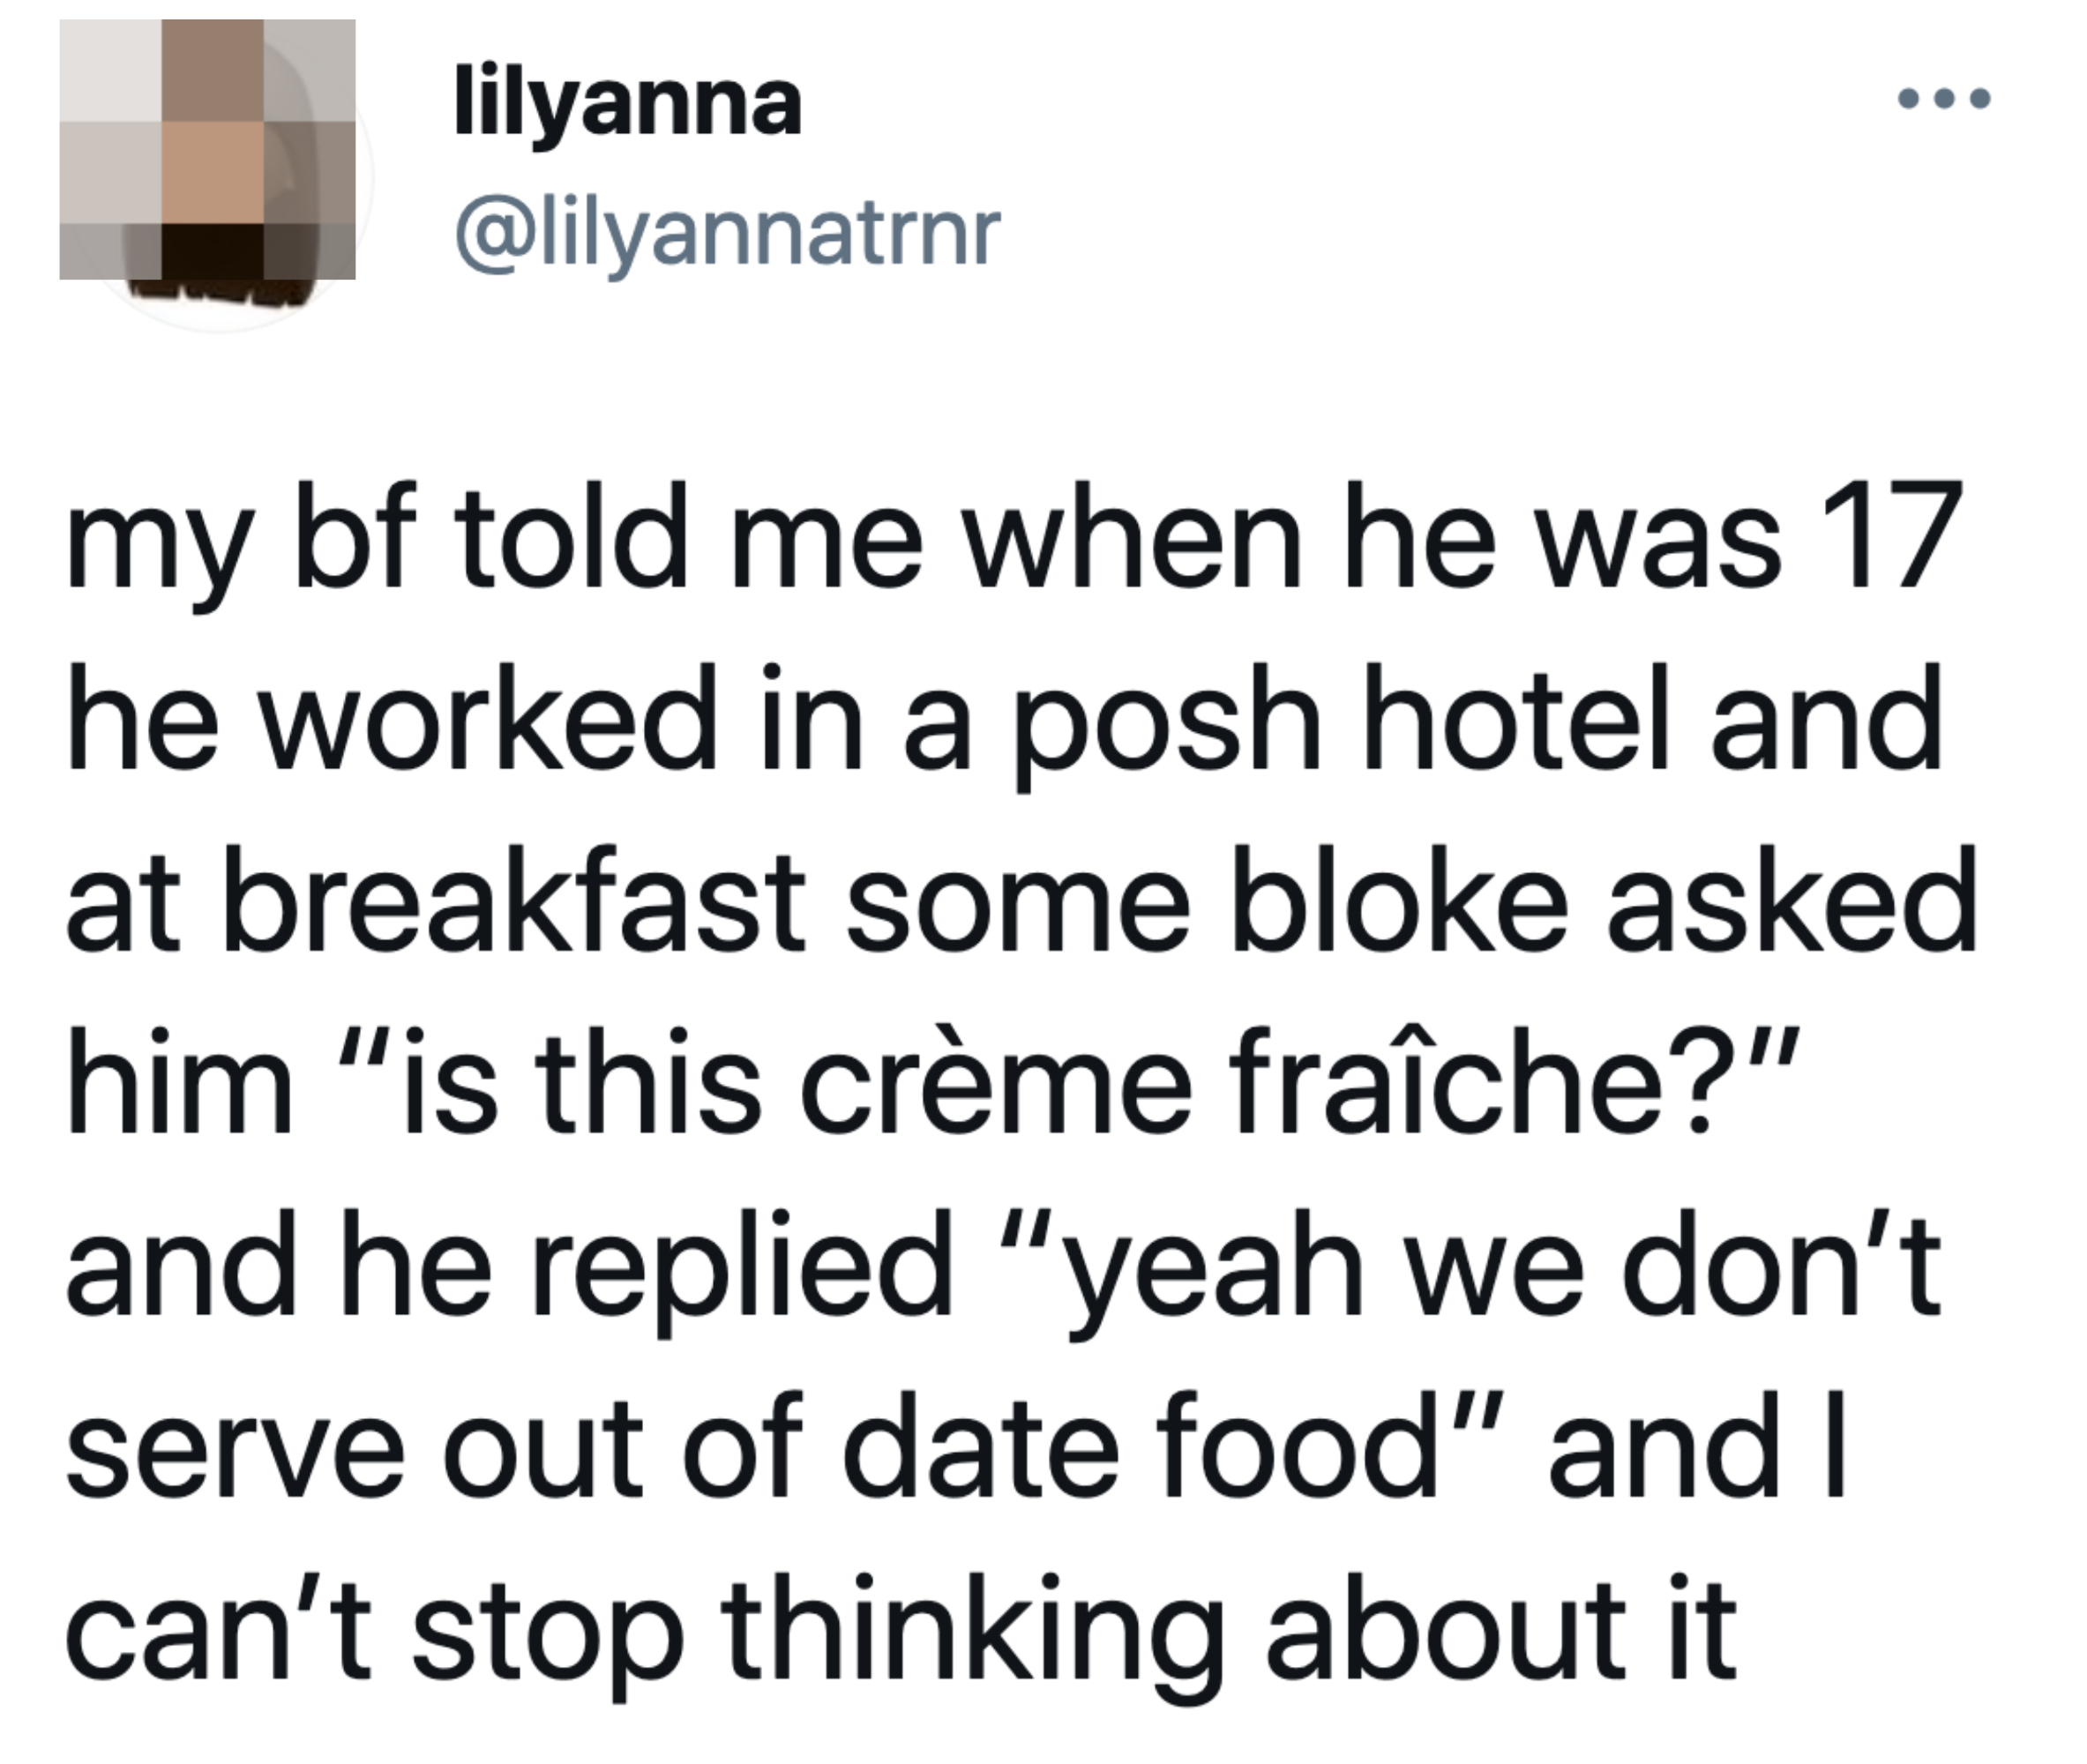 Tweet reading &quot;my bf told me when he was 17 he worked in a posh hotel and at breakfast some bloke asked him &#x27;is this crème fraîche?&#x27; and he replied &#x27;yeah we don’t serve out of date food&#x27; and I can’t stop thinking about it&quot;